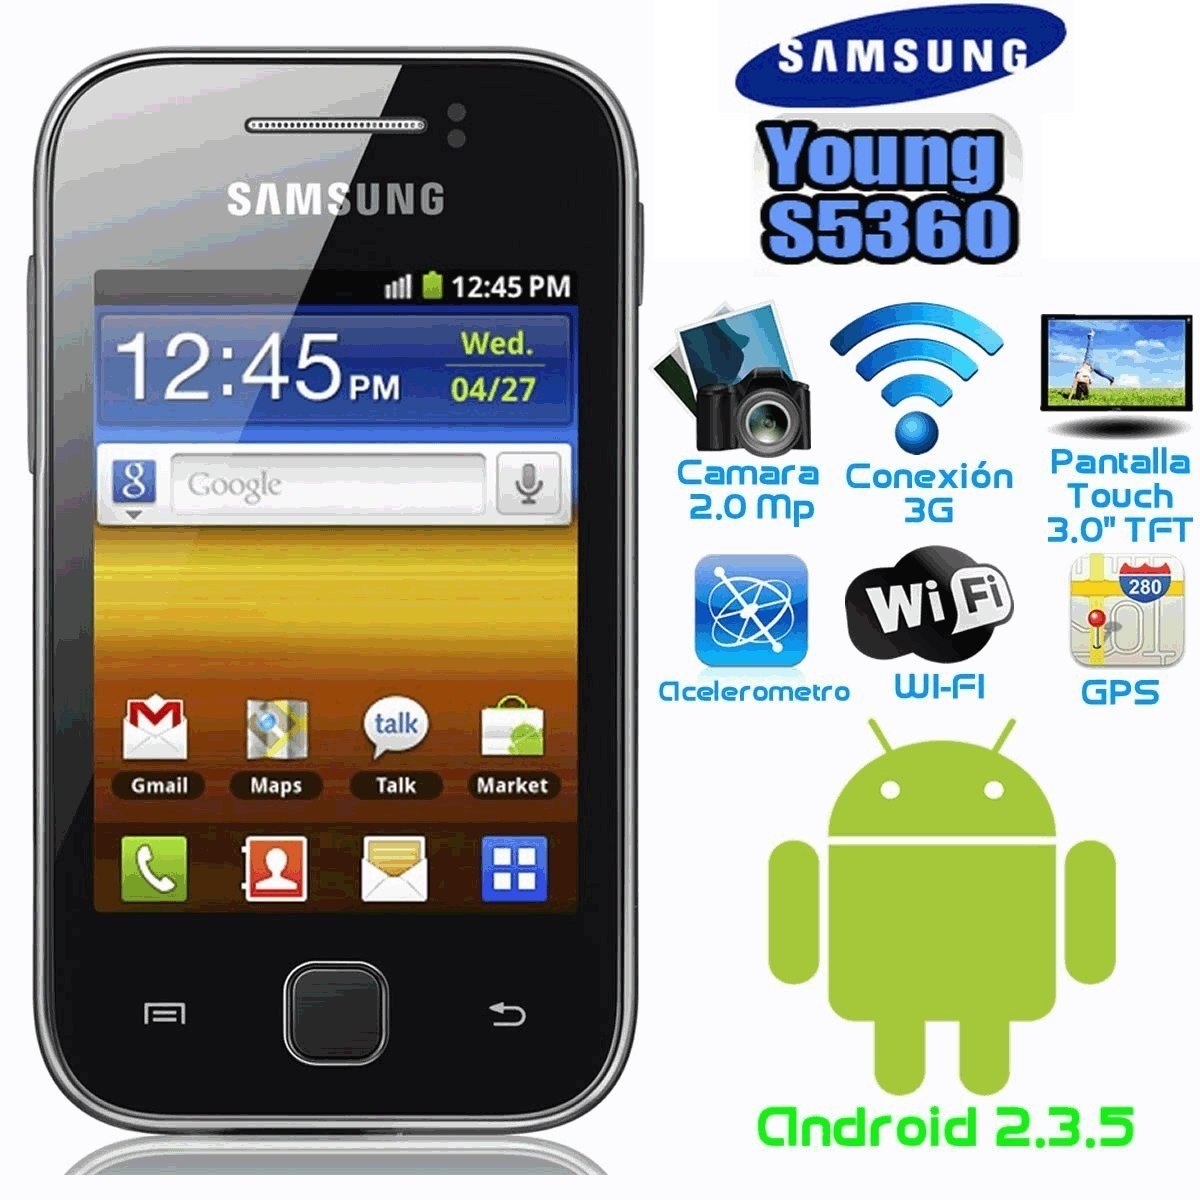 IE WE BLOG: NEW UPDATE FOR SAMSUNG GALAXY YOUNG GT-S5360